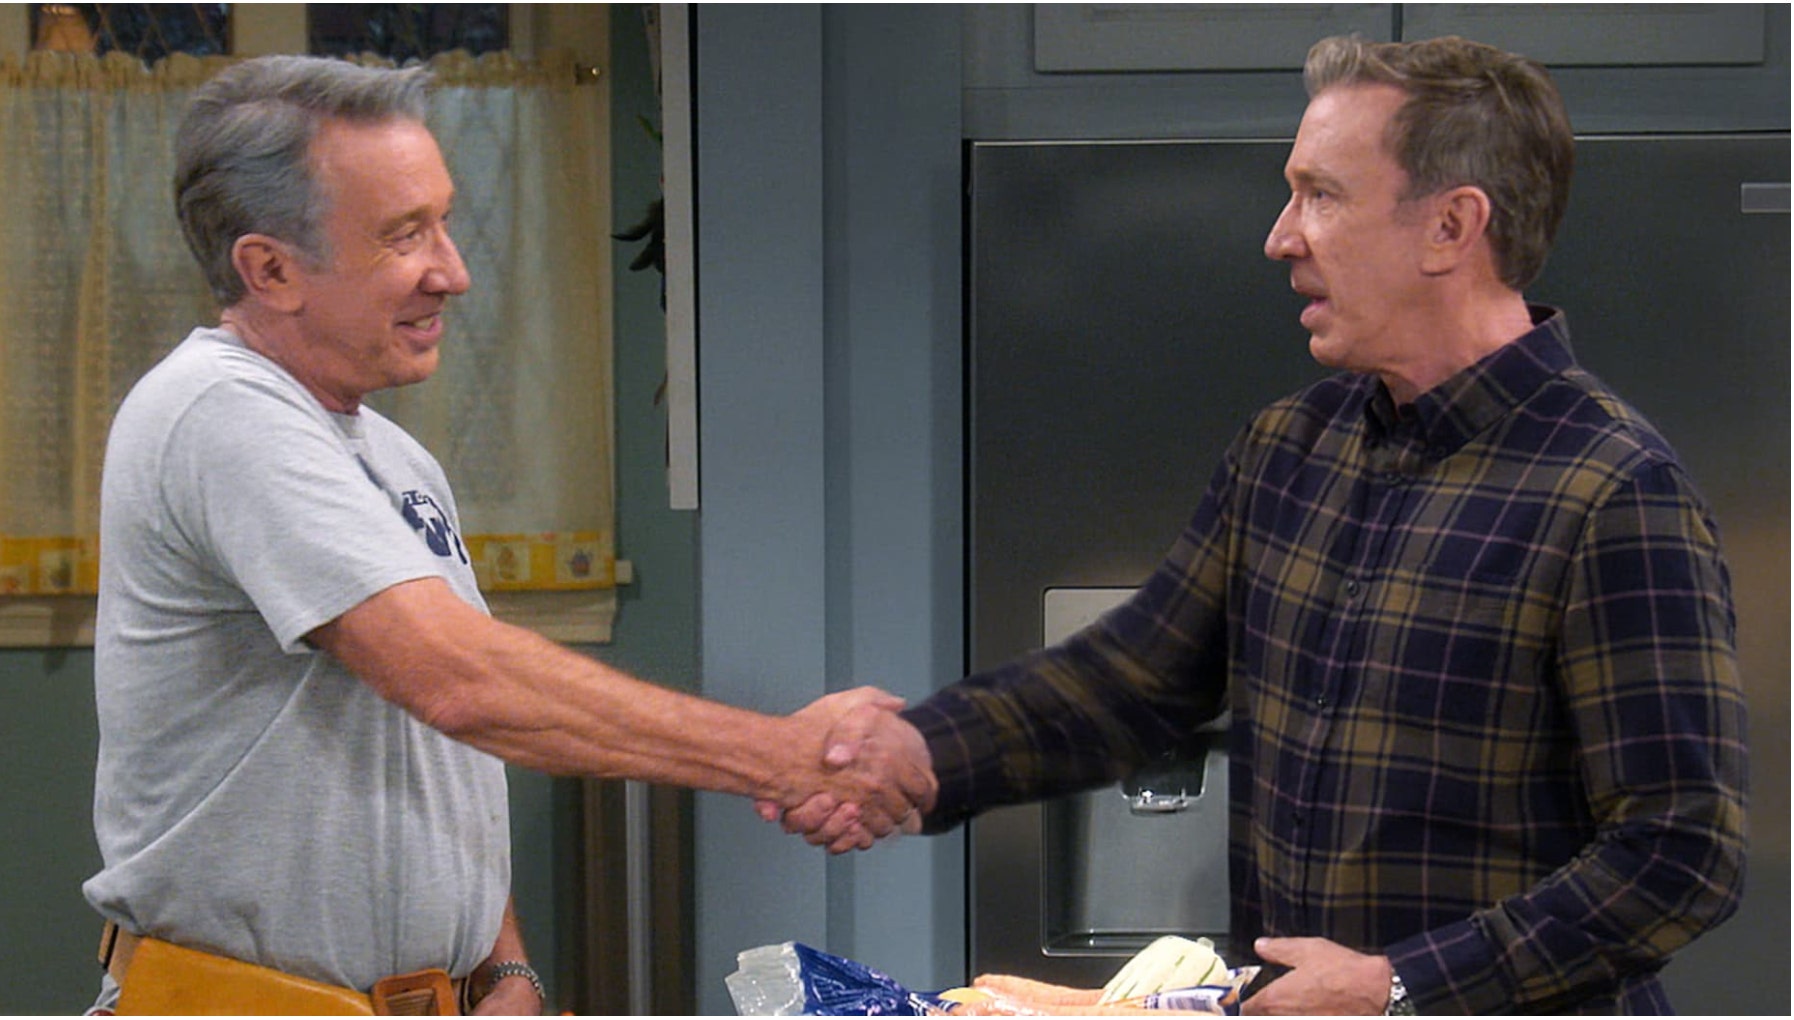 Tim Allen admits it was ‘peculiar’ to play ‘Home Improvement’ role on ‘Last Man Standing’